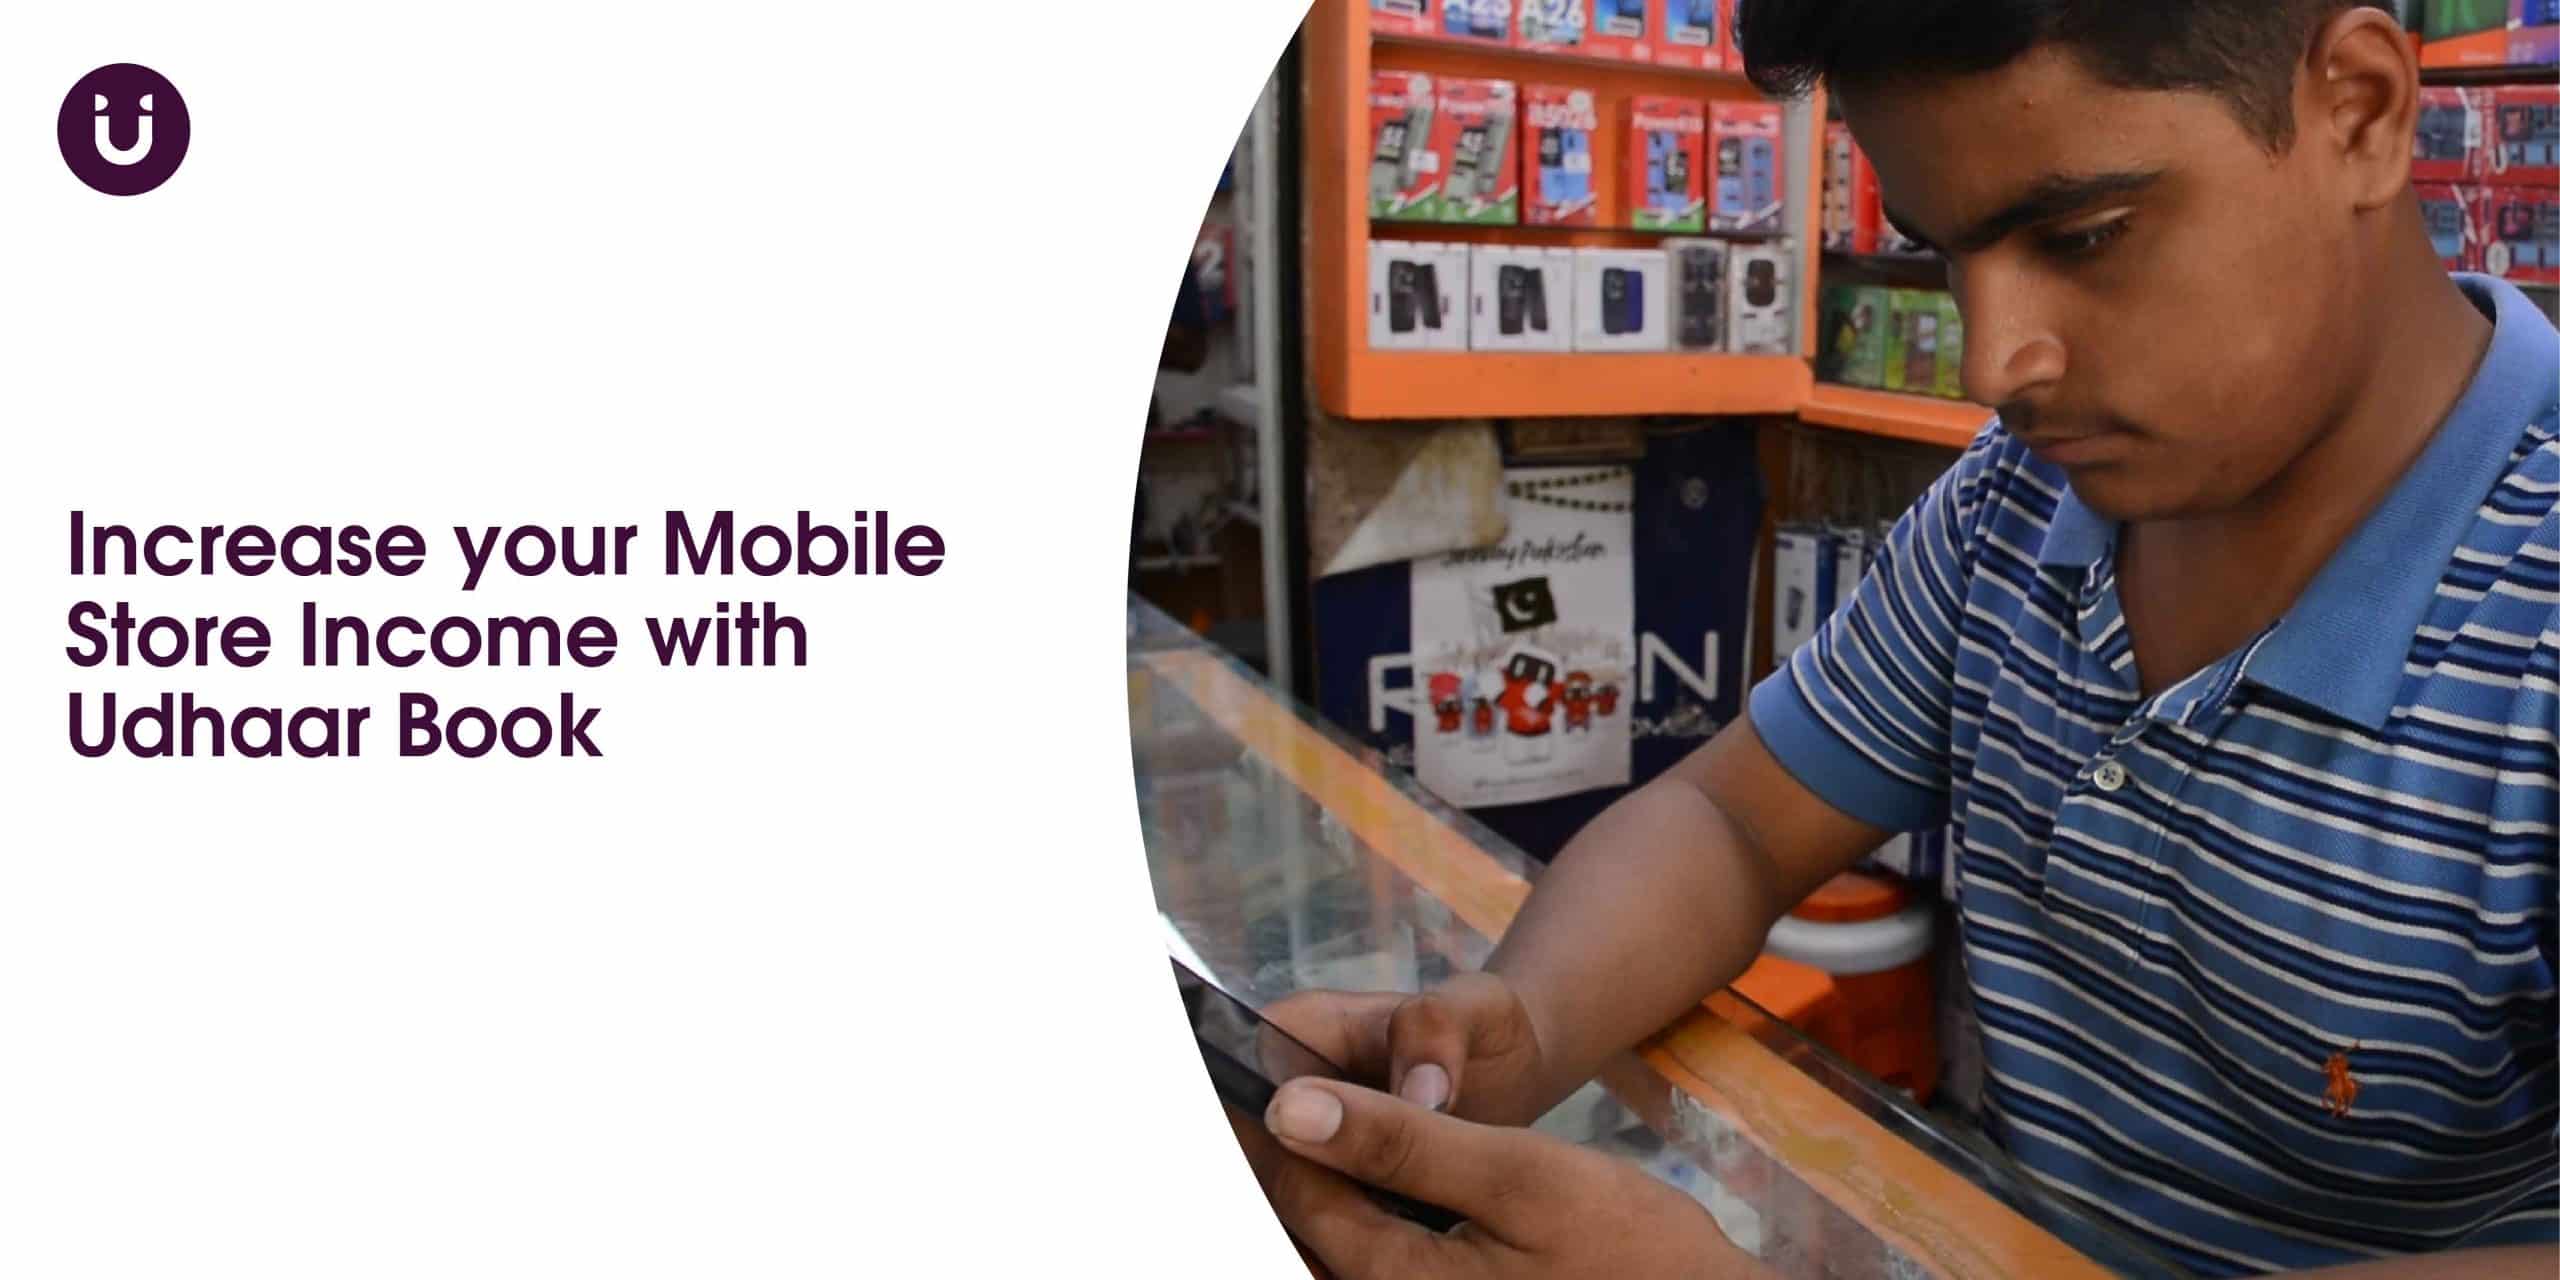 Increase your Mobile Store Income with Udhaar Book